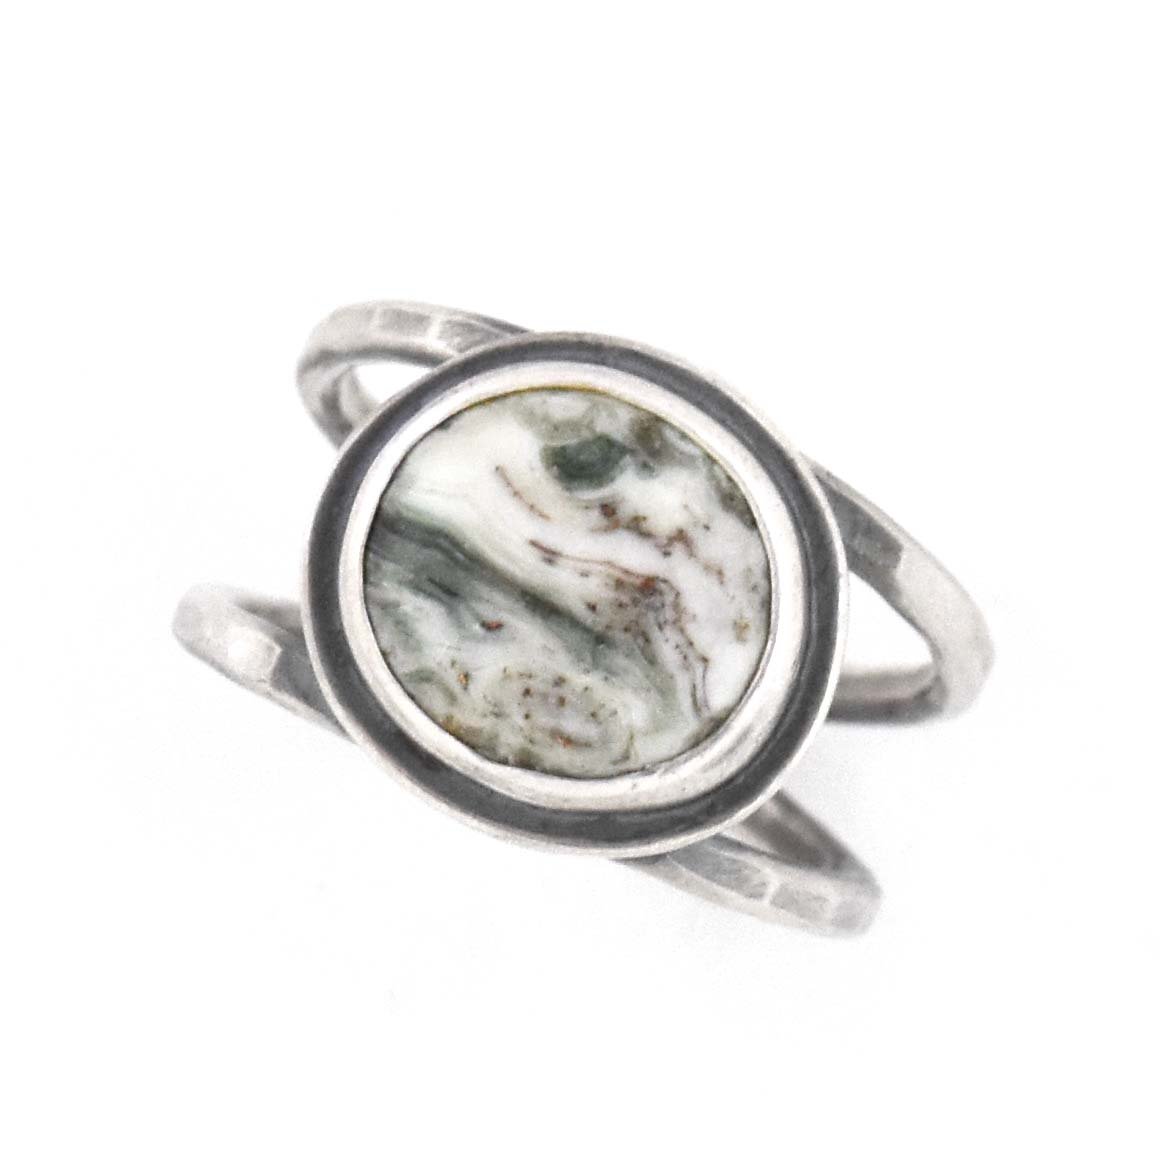 Copper Lake Superior Agate Ring - Size 7 - Ring   5697 - handmade by Beth Millner Jewelry